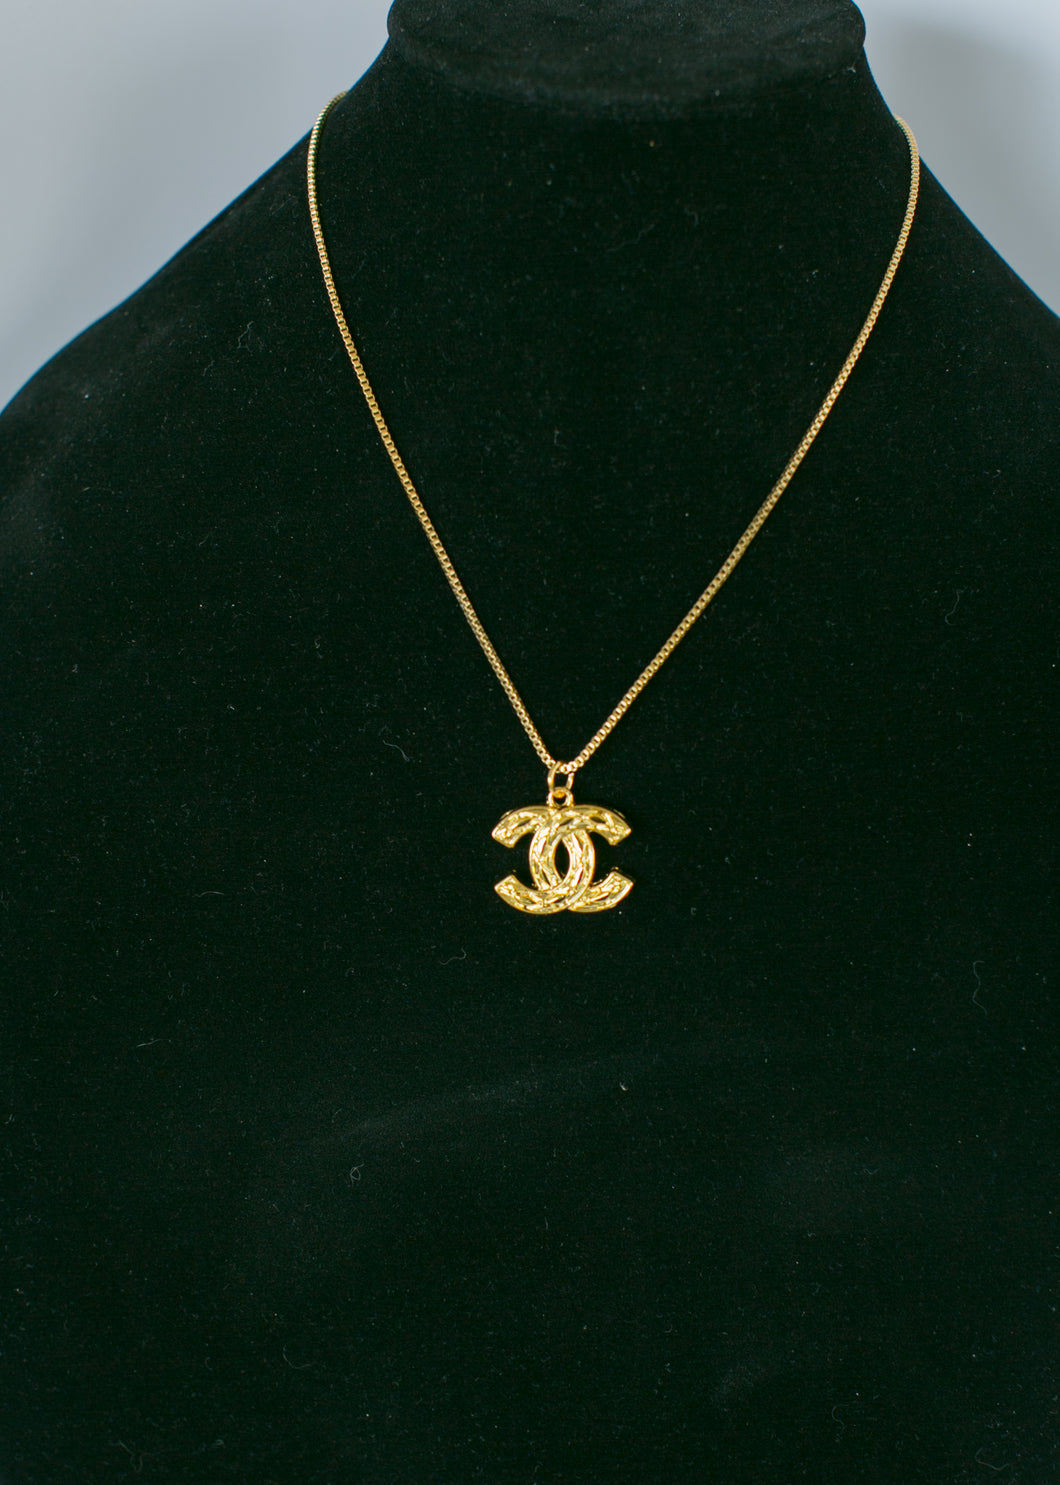 Pendant Necklace with Gold Tone Chain